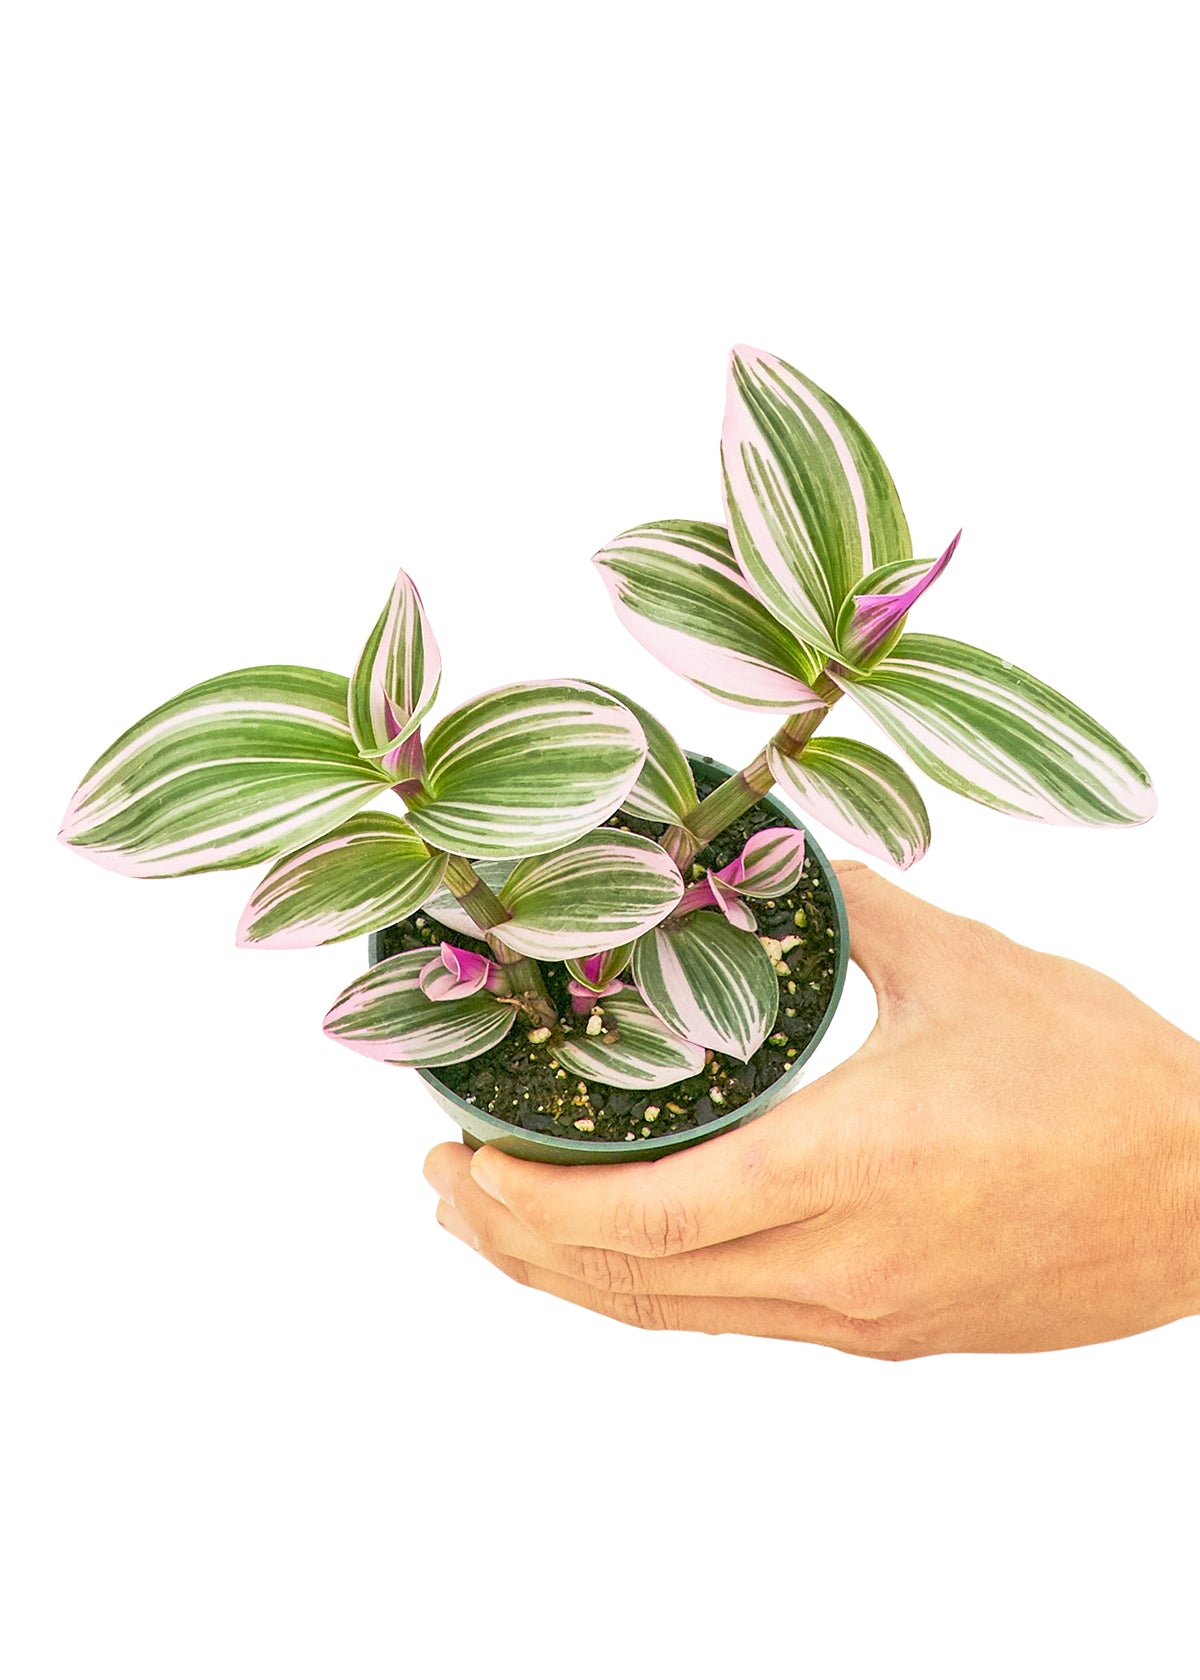 Small size Nanouk Tradescantia Plant in a growers pot with a white background with a hand holding the pot showing the top view